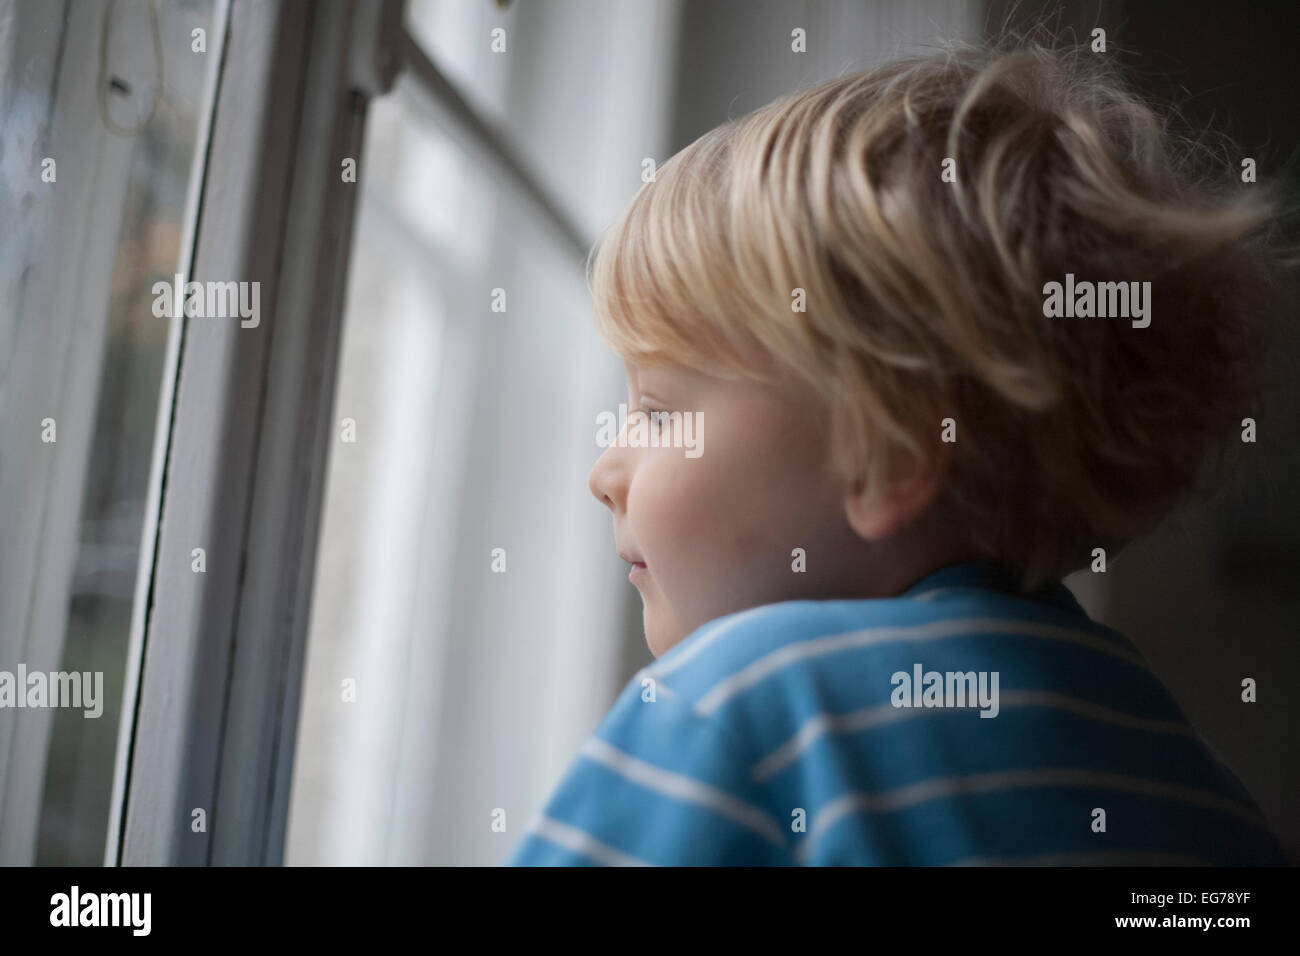 Profile of little boy looking out of window Stock Photo